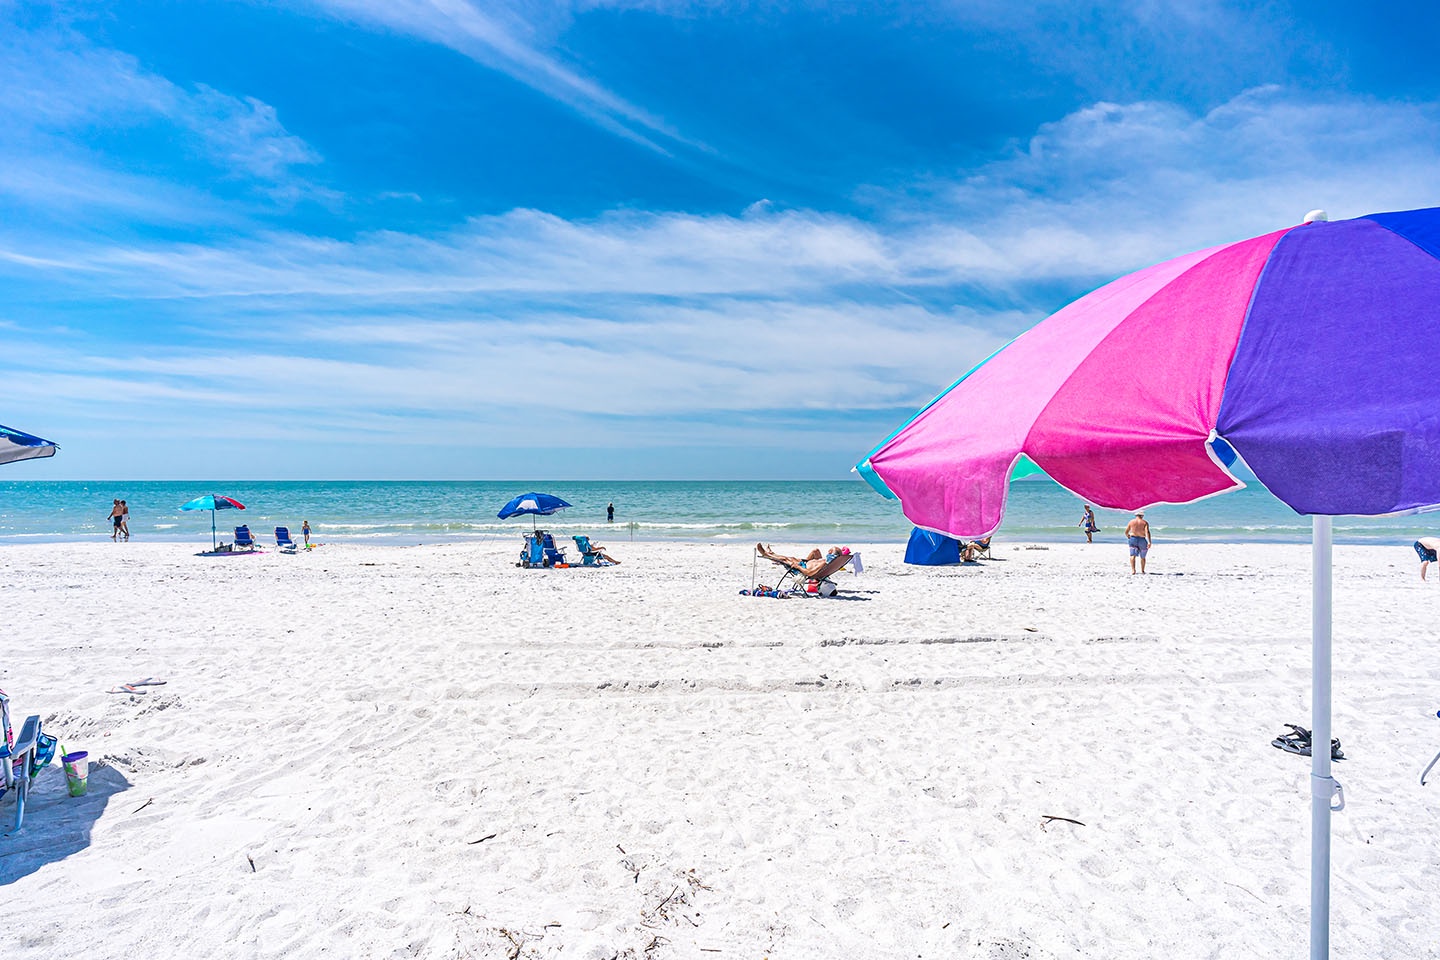 Bright colors and sugary white sands.